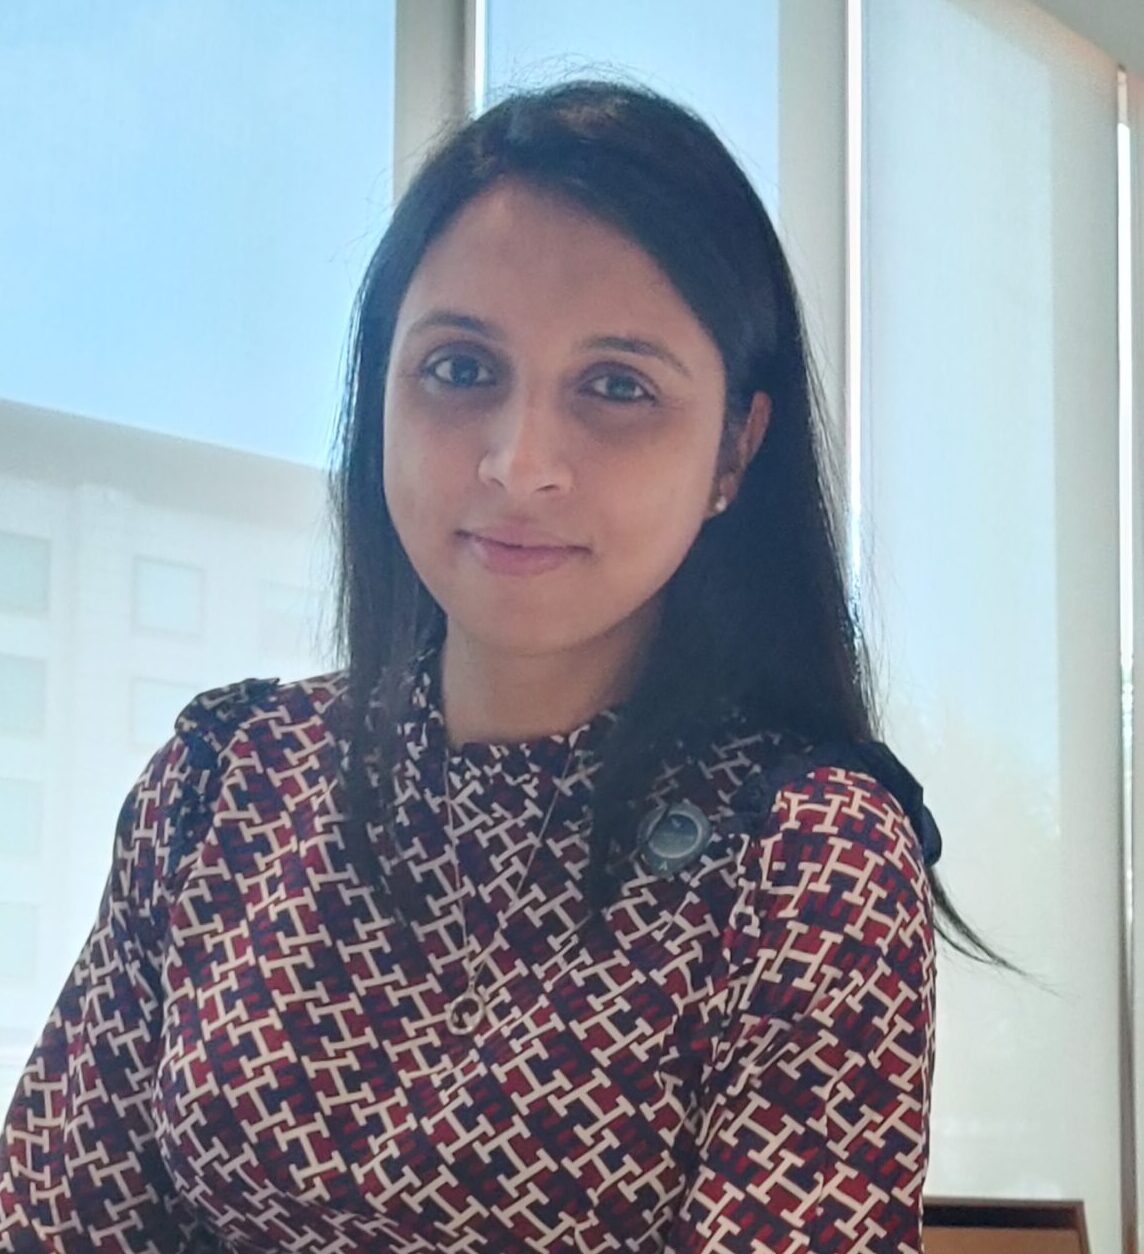 Novotel Hyderabad Airport Appoints Kishwar Jahan As The New Marketing & Communications Manager